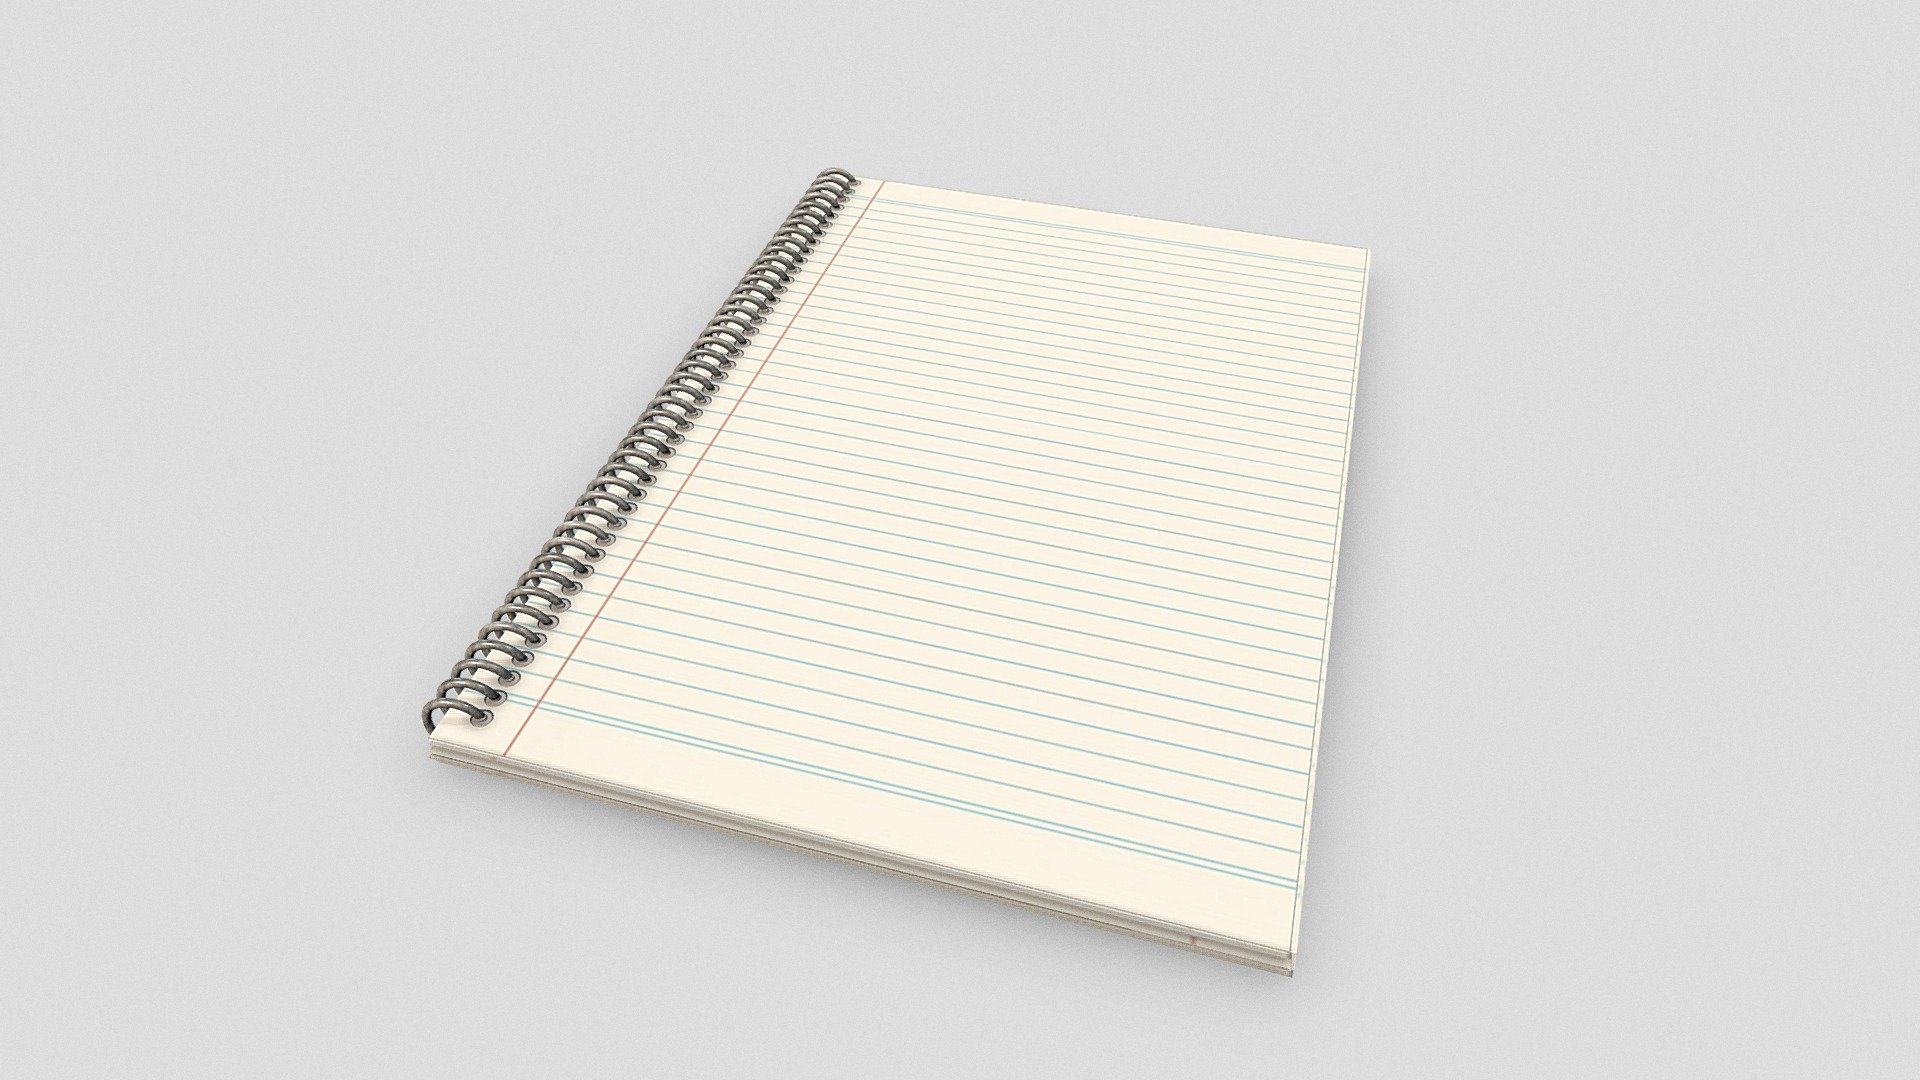 Simplel spiral notepad, handy prop to dit any sort of interior environment such as office or school

PBR textures @2k - Single spiral notepad - Download Free 3D model by Sousinho 3d model